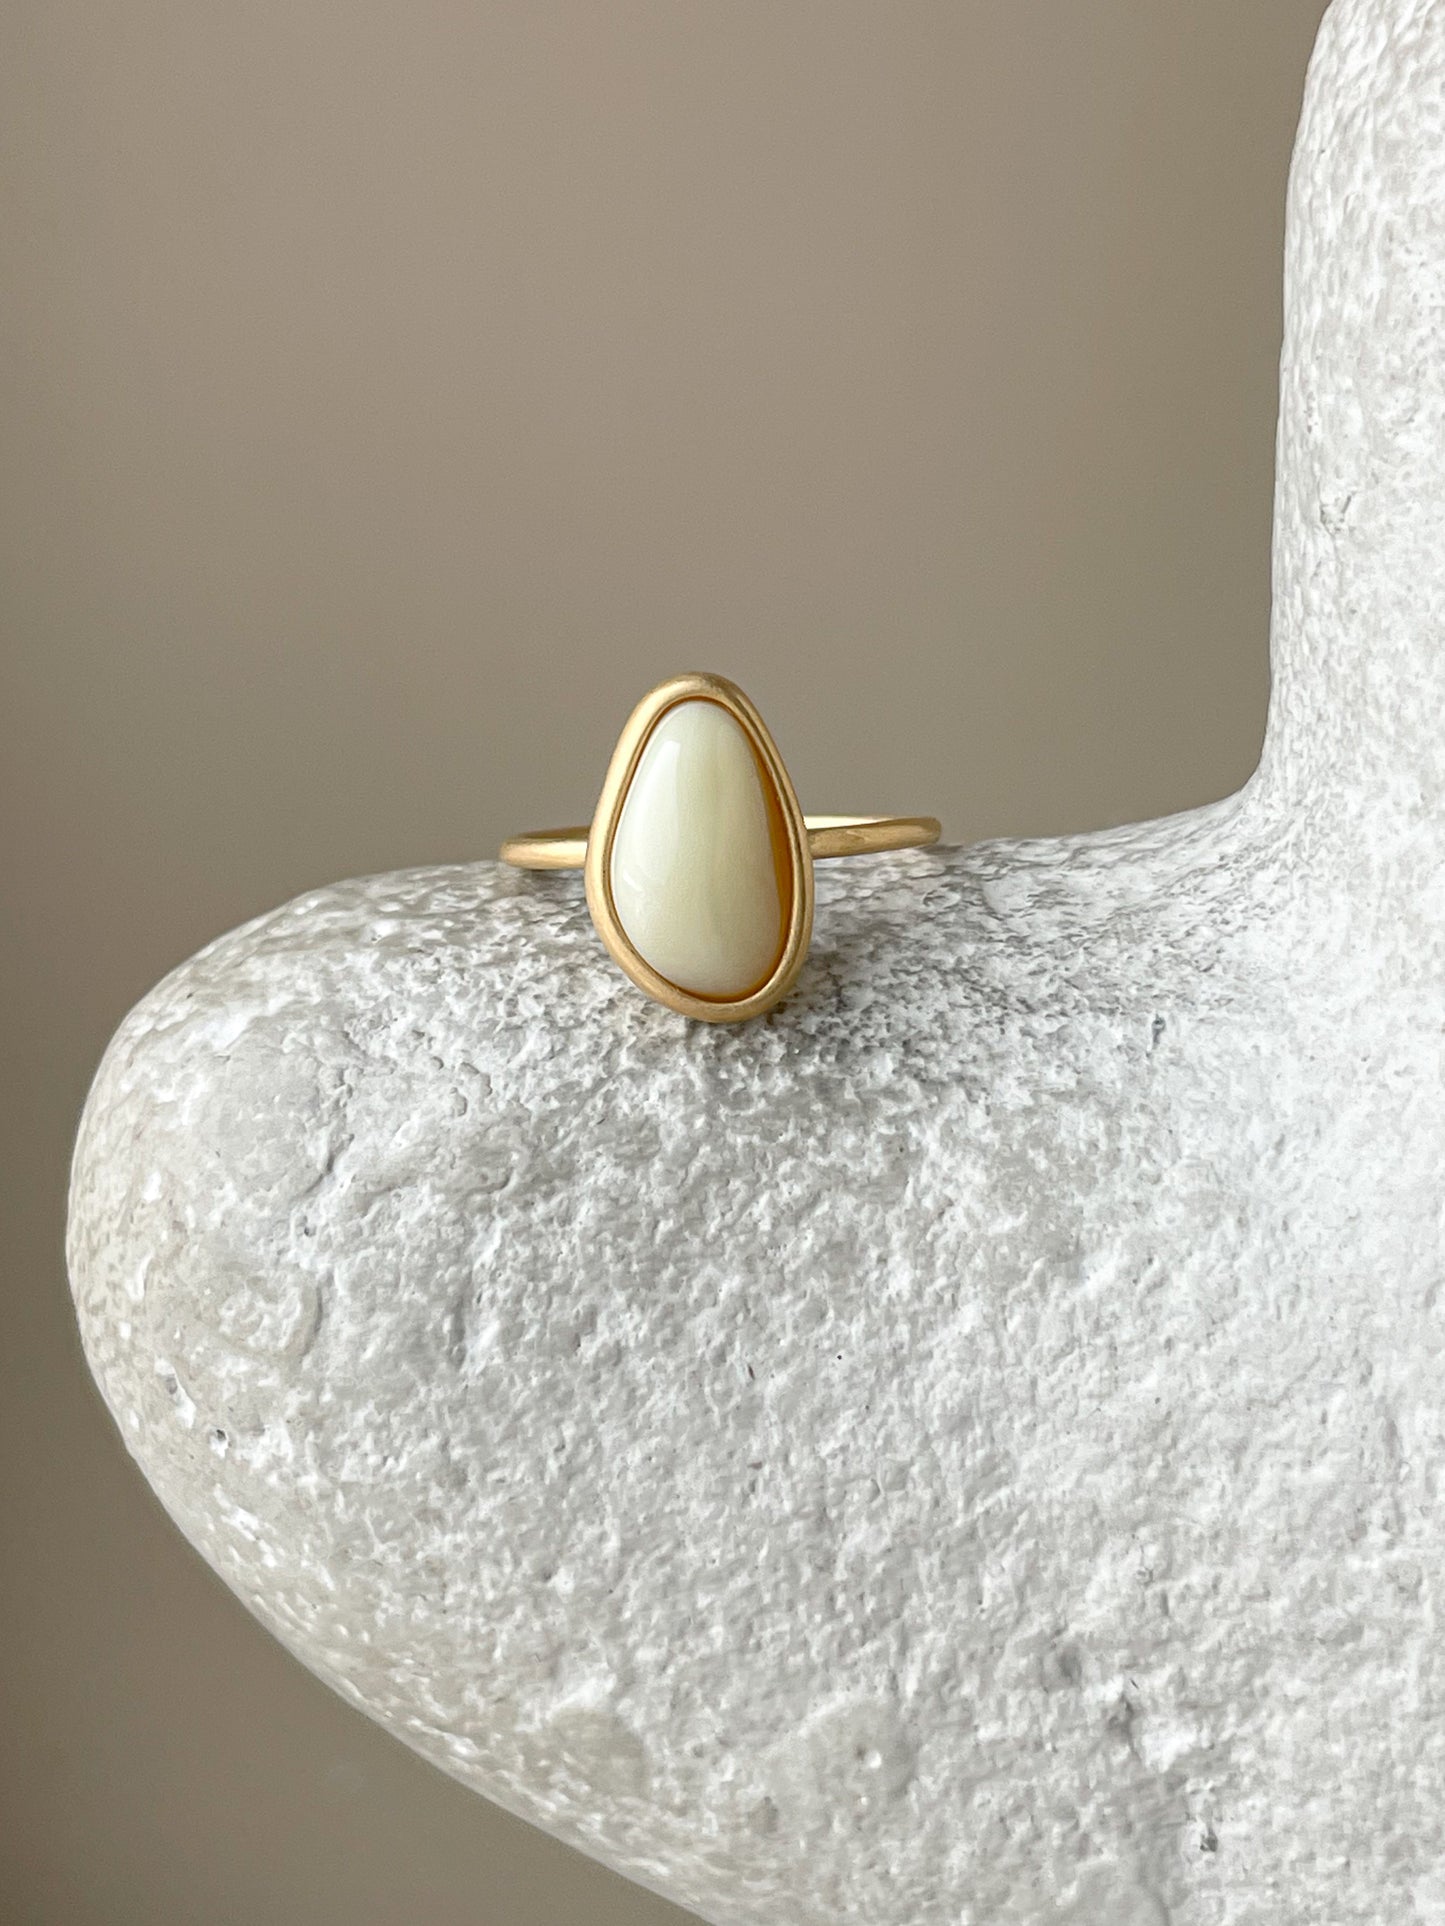 White amber ring - Gold plated silver - Thin ring collection - Size 7